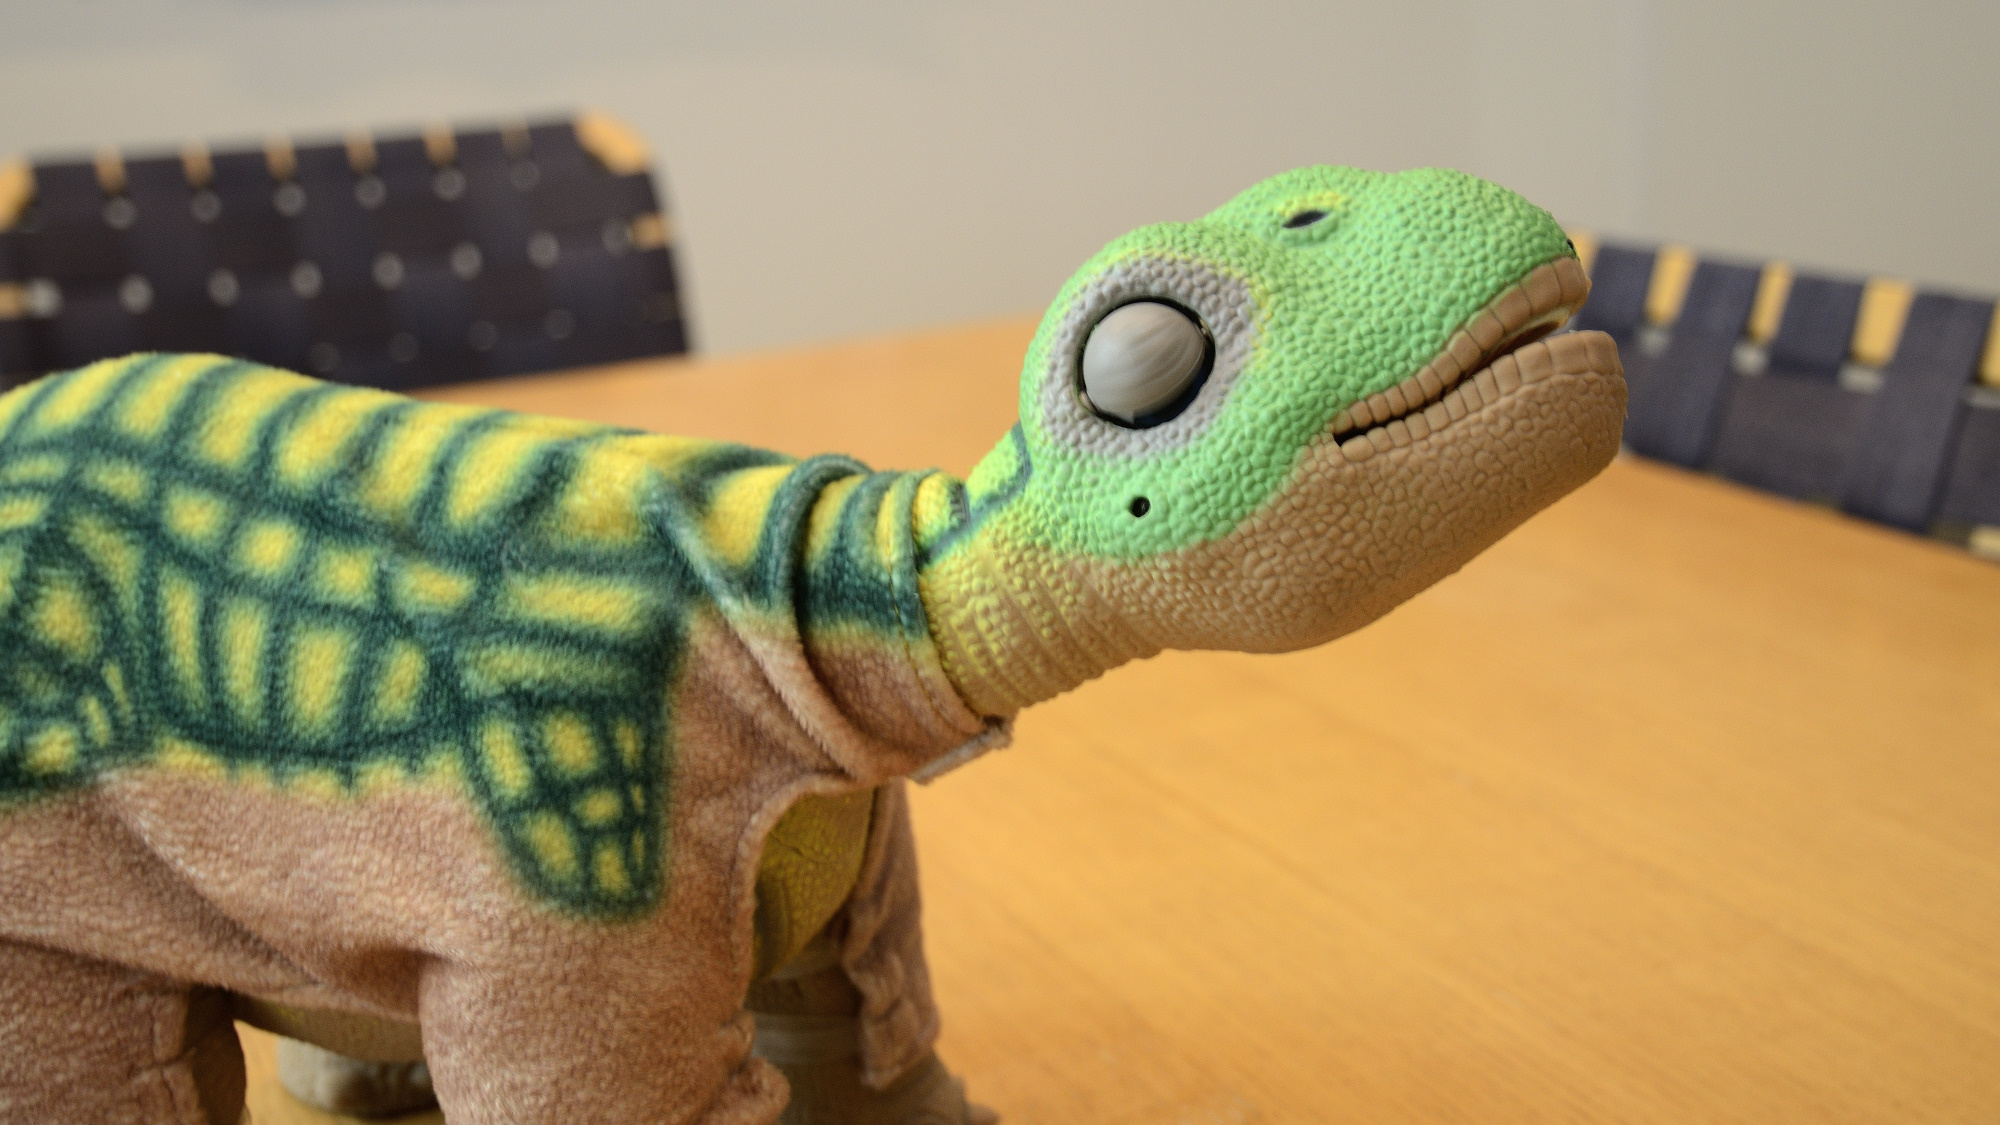 A Pleo robot comfortably stretching his body.